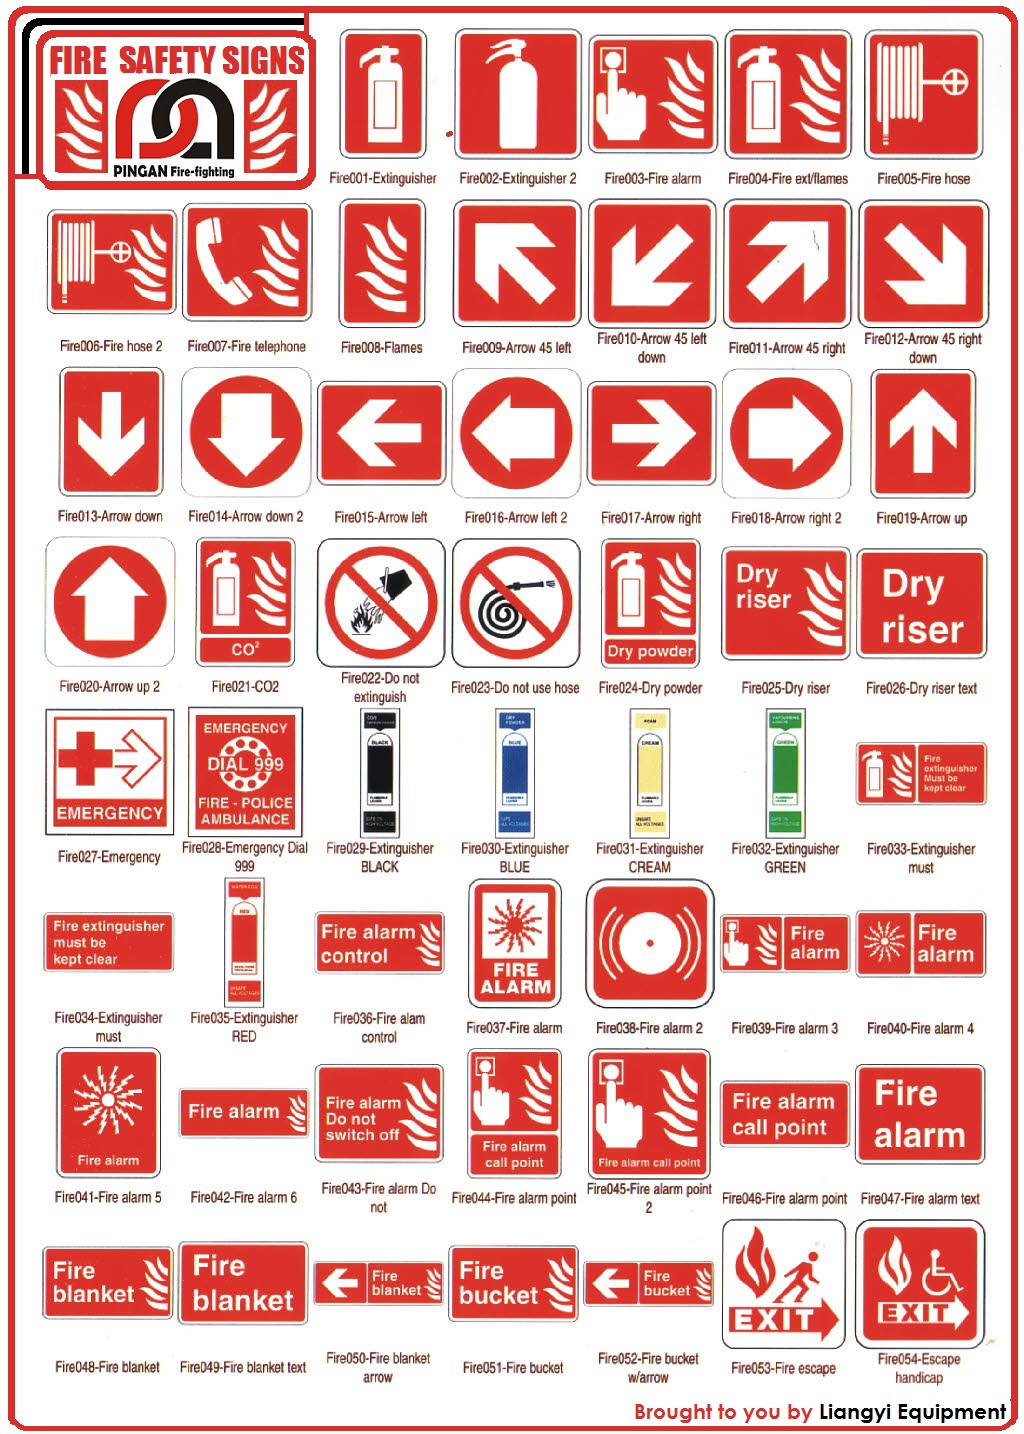 Fire Safety Signs by Liangyiequipment | Visual.ly